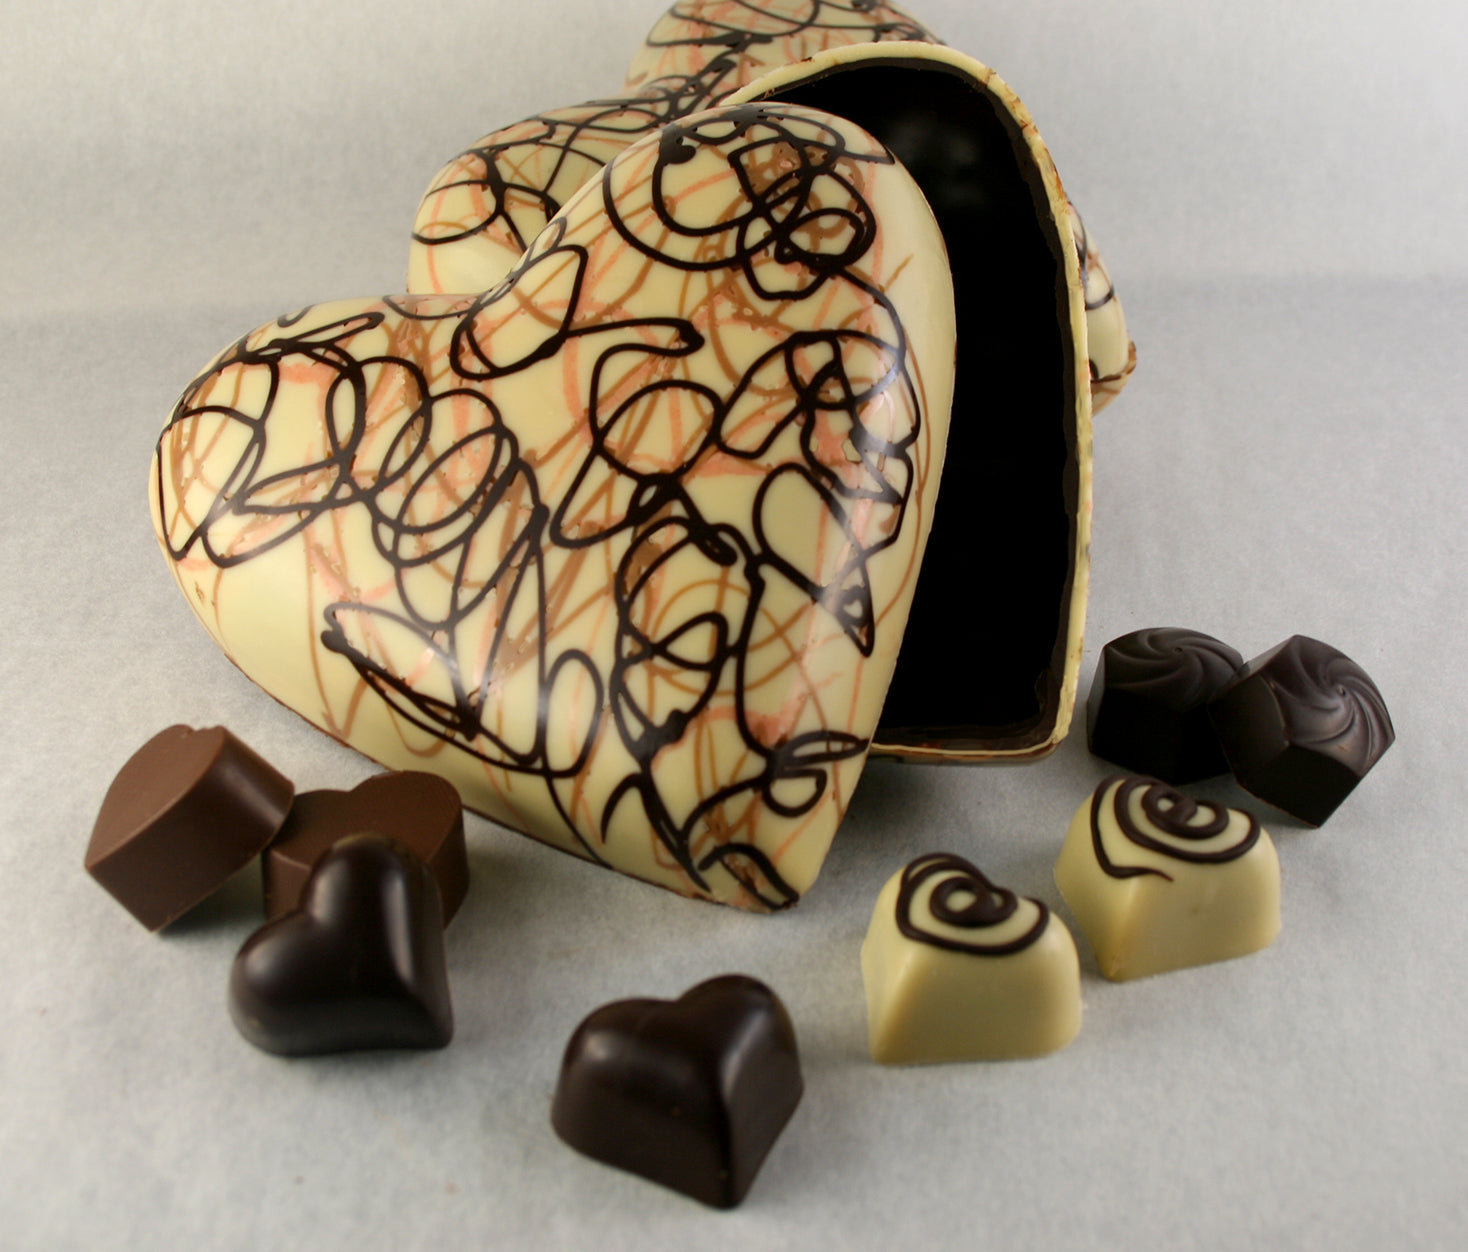 Mother's Day Chocolate Heart filled with 8 Truffles